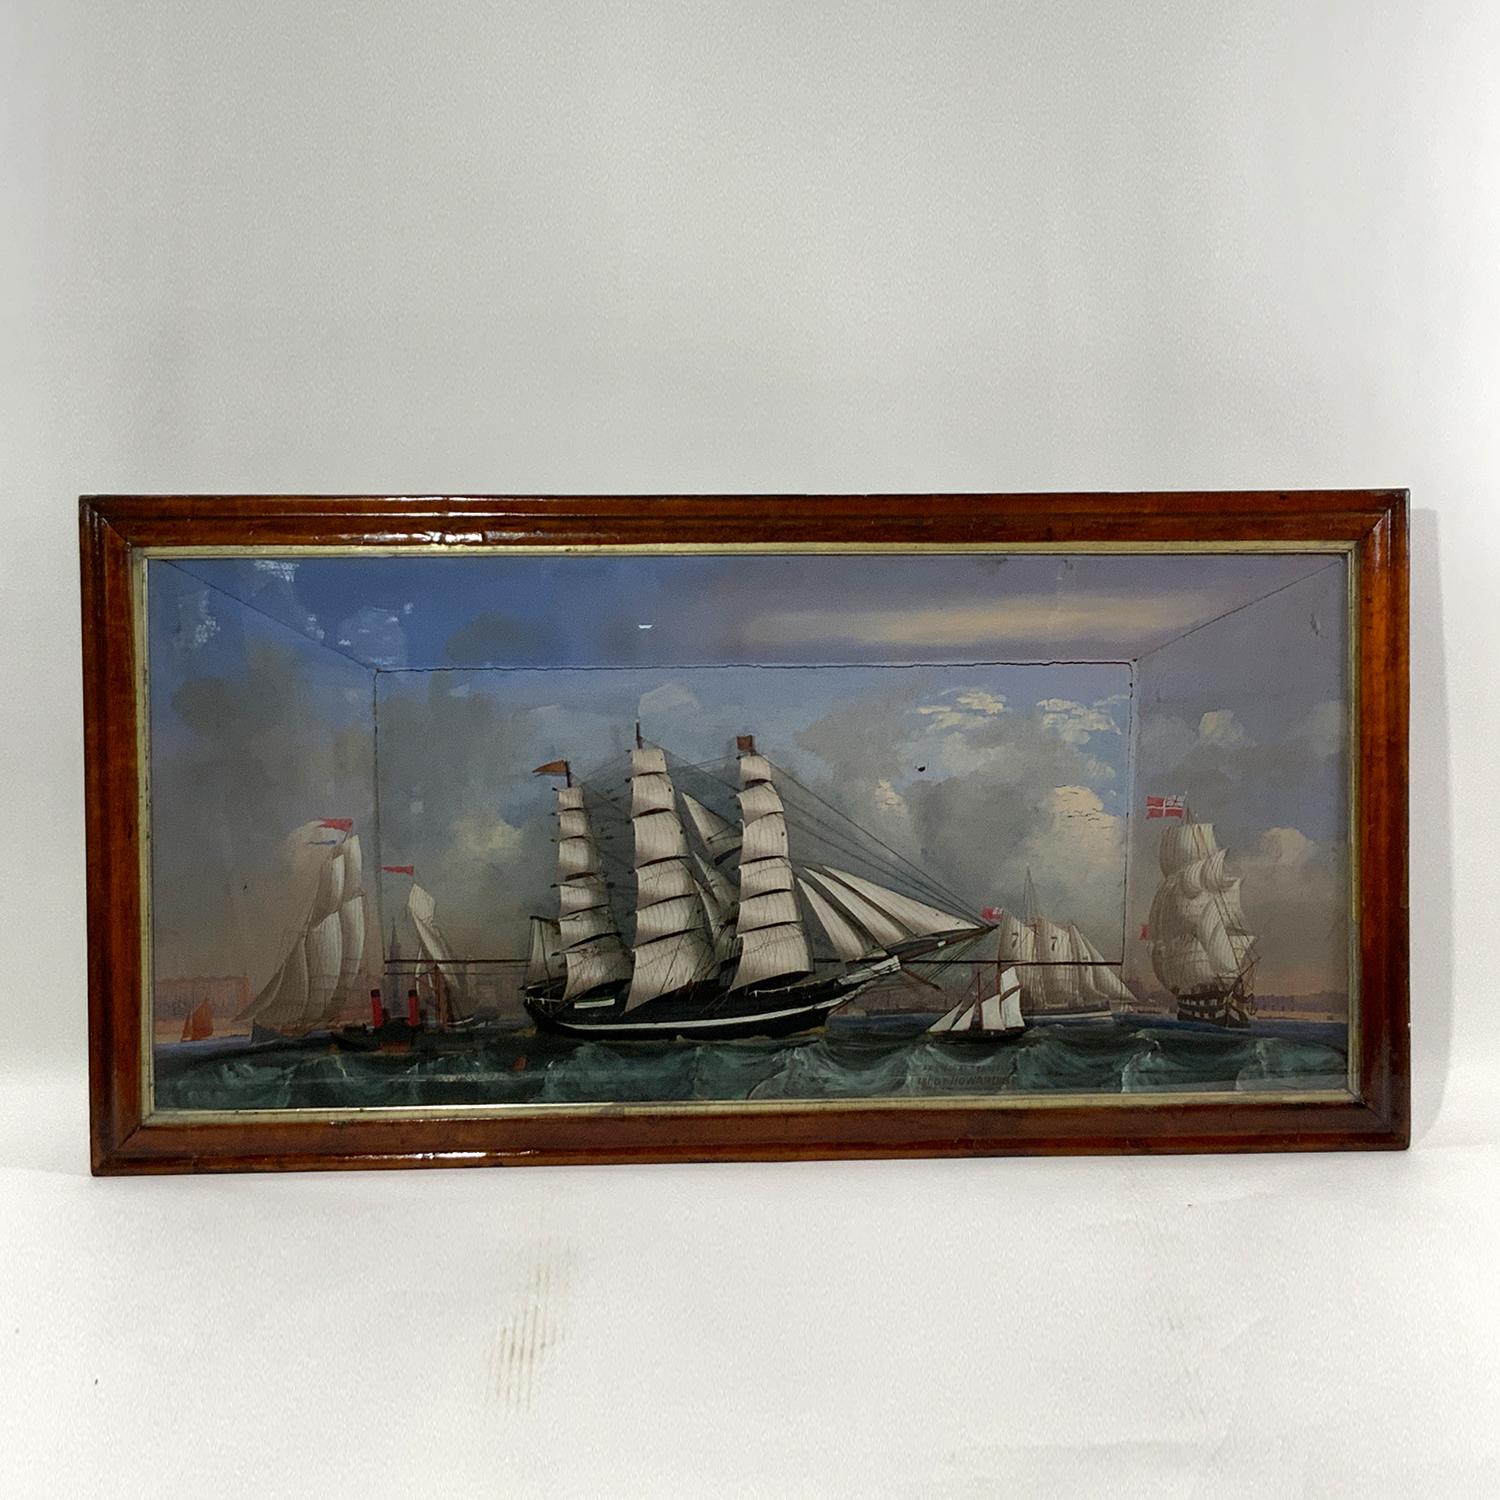 19th Century shadow box. Ship at center flanked by a steamer and a pilot boat. Profusely painted background depicts the cliffs of Dover and numerous sailing vessels. Signed lower right 